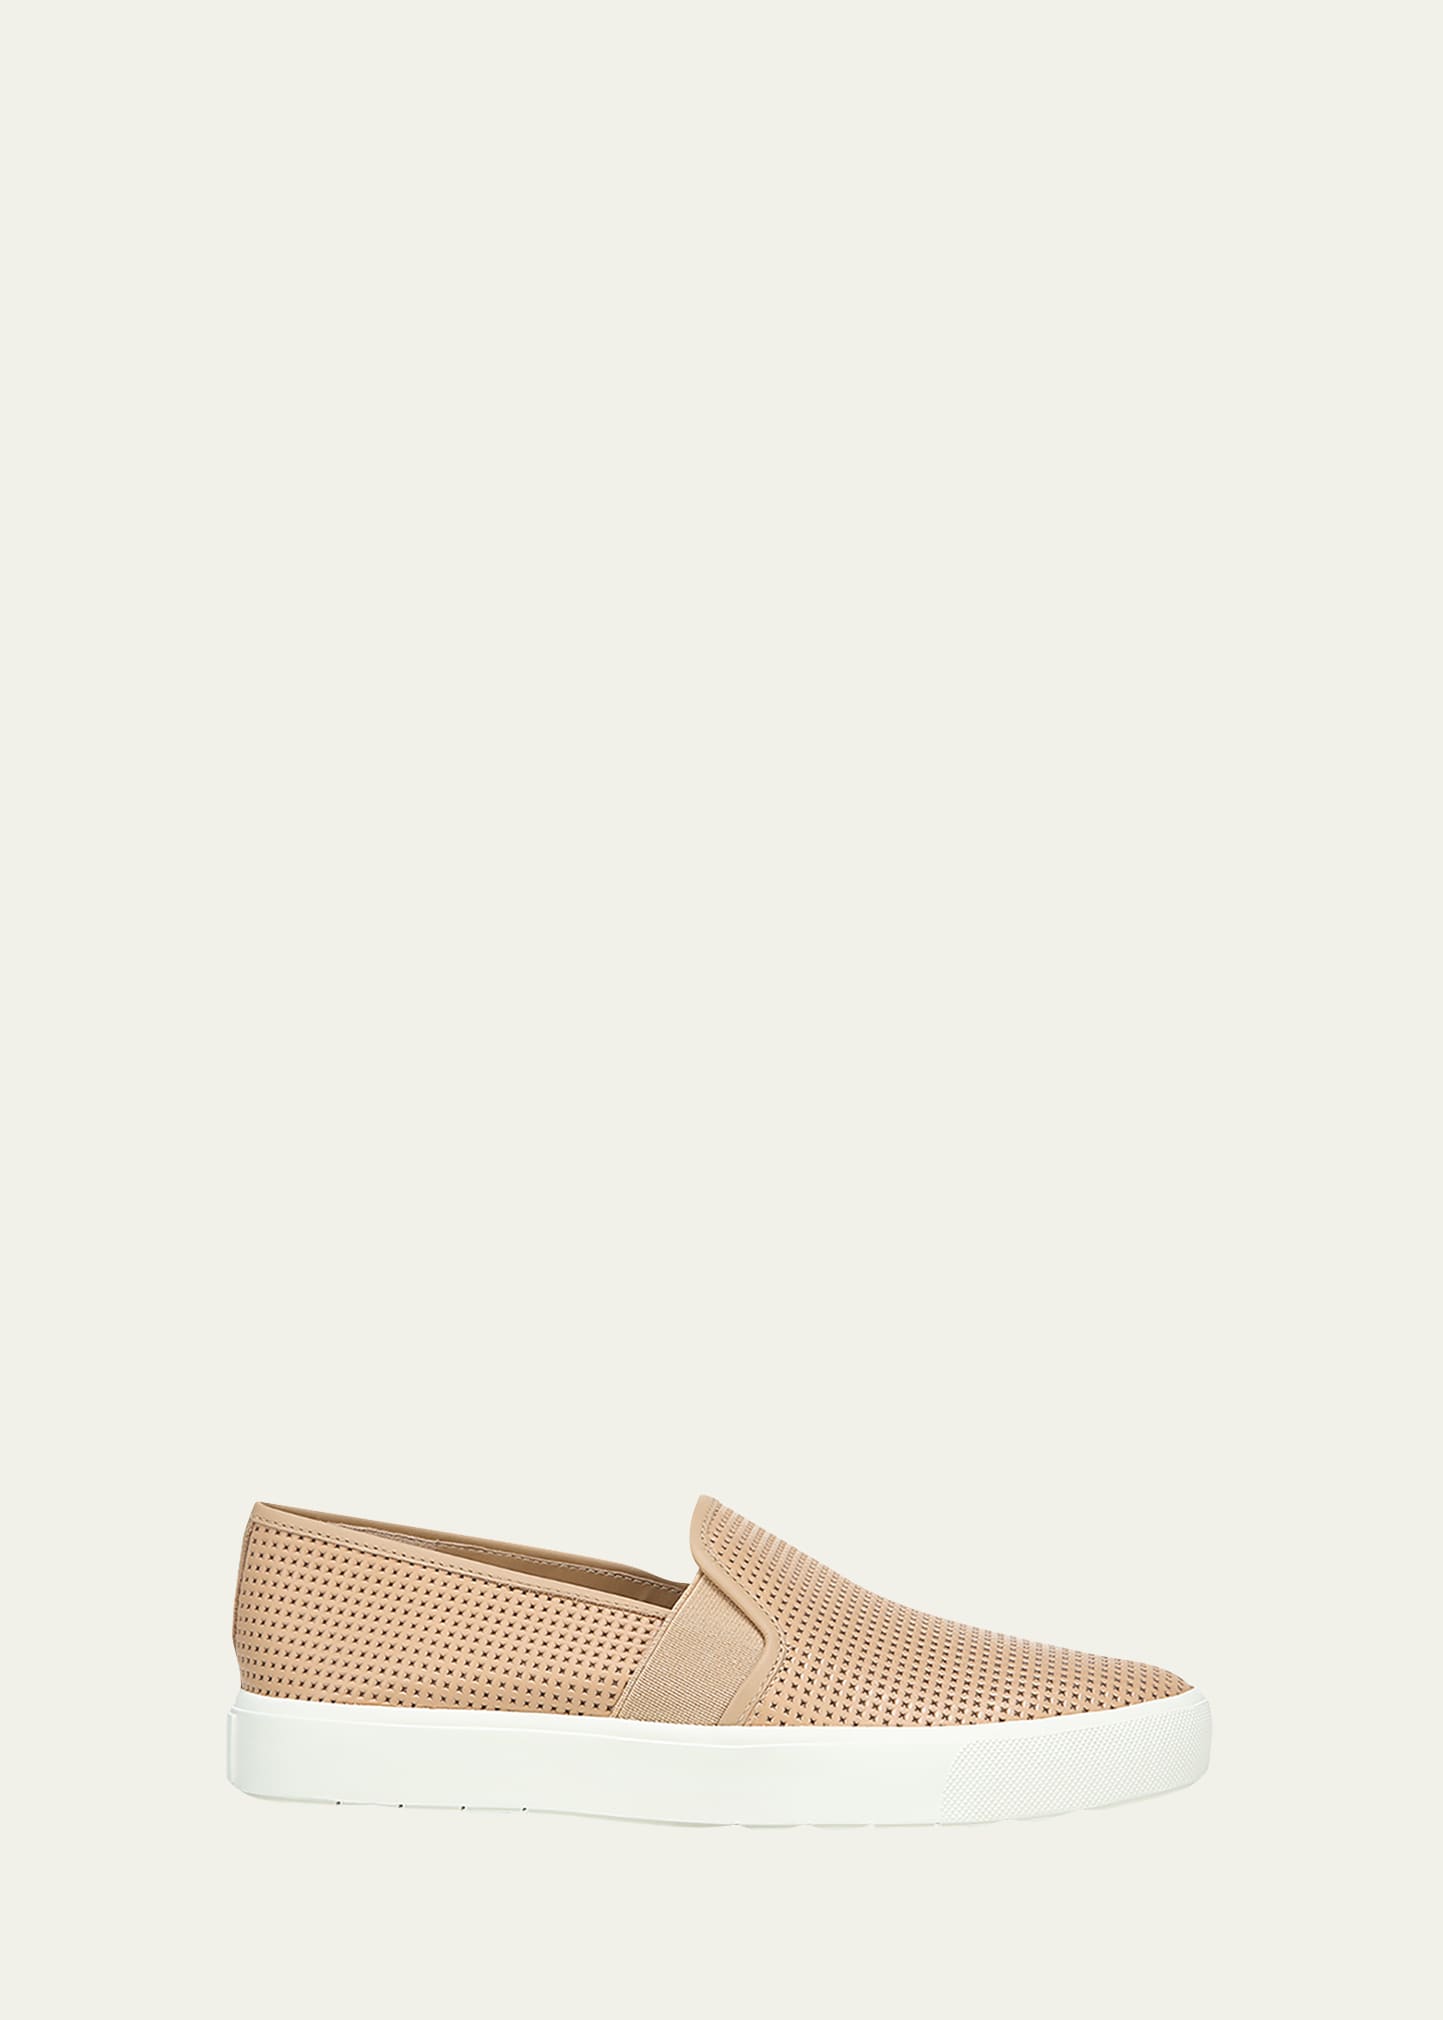 Vince Blair Perforated Leather Slip-On Sneakers